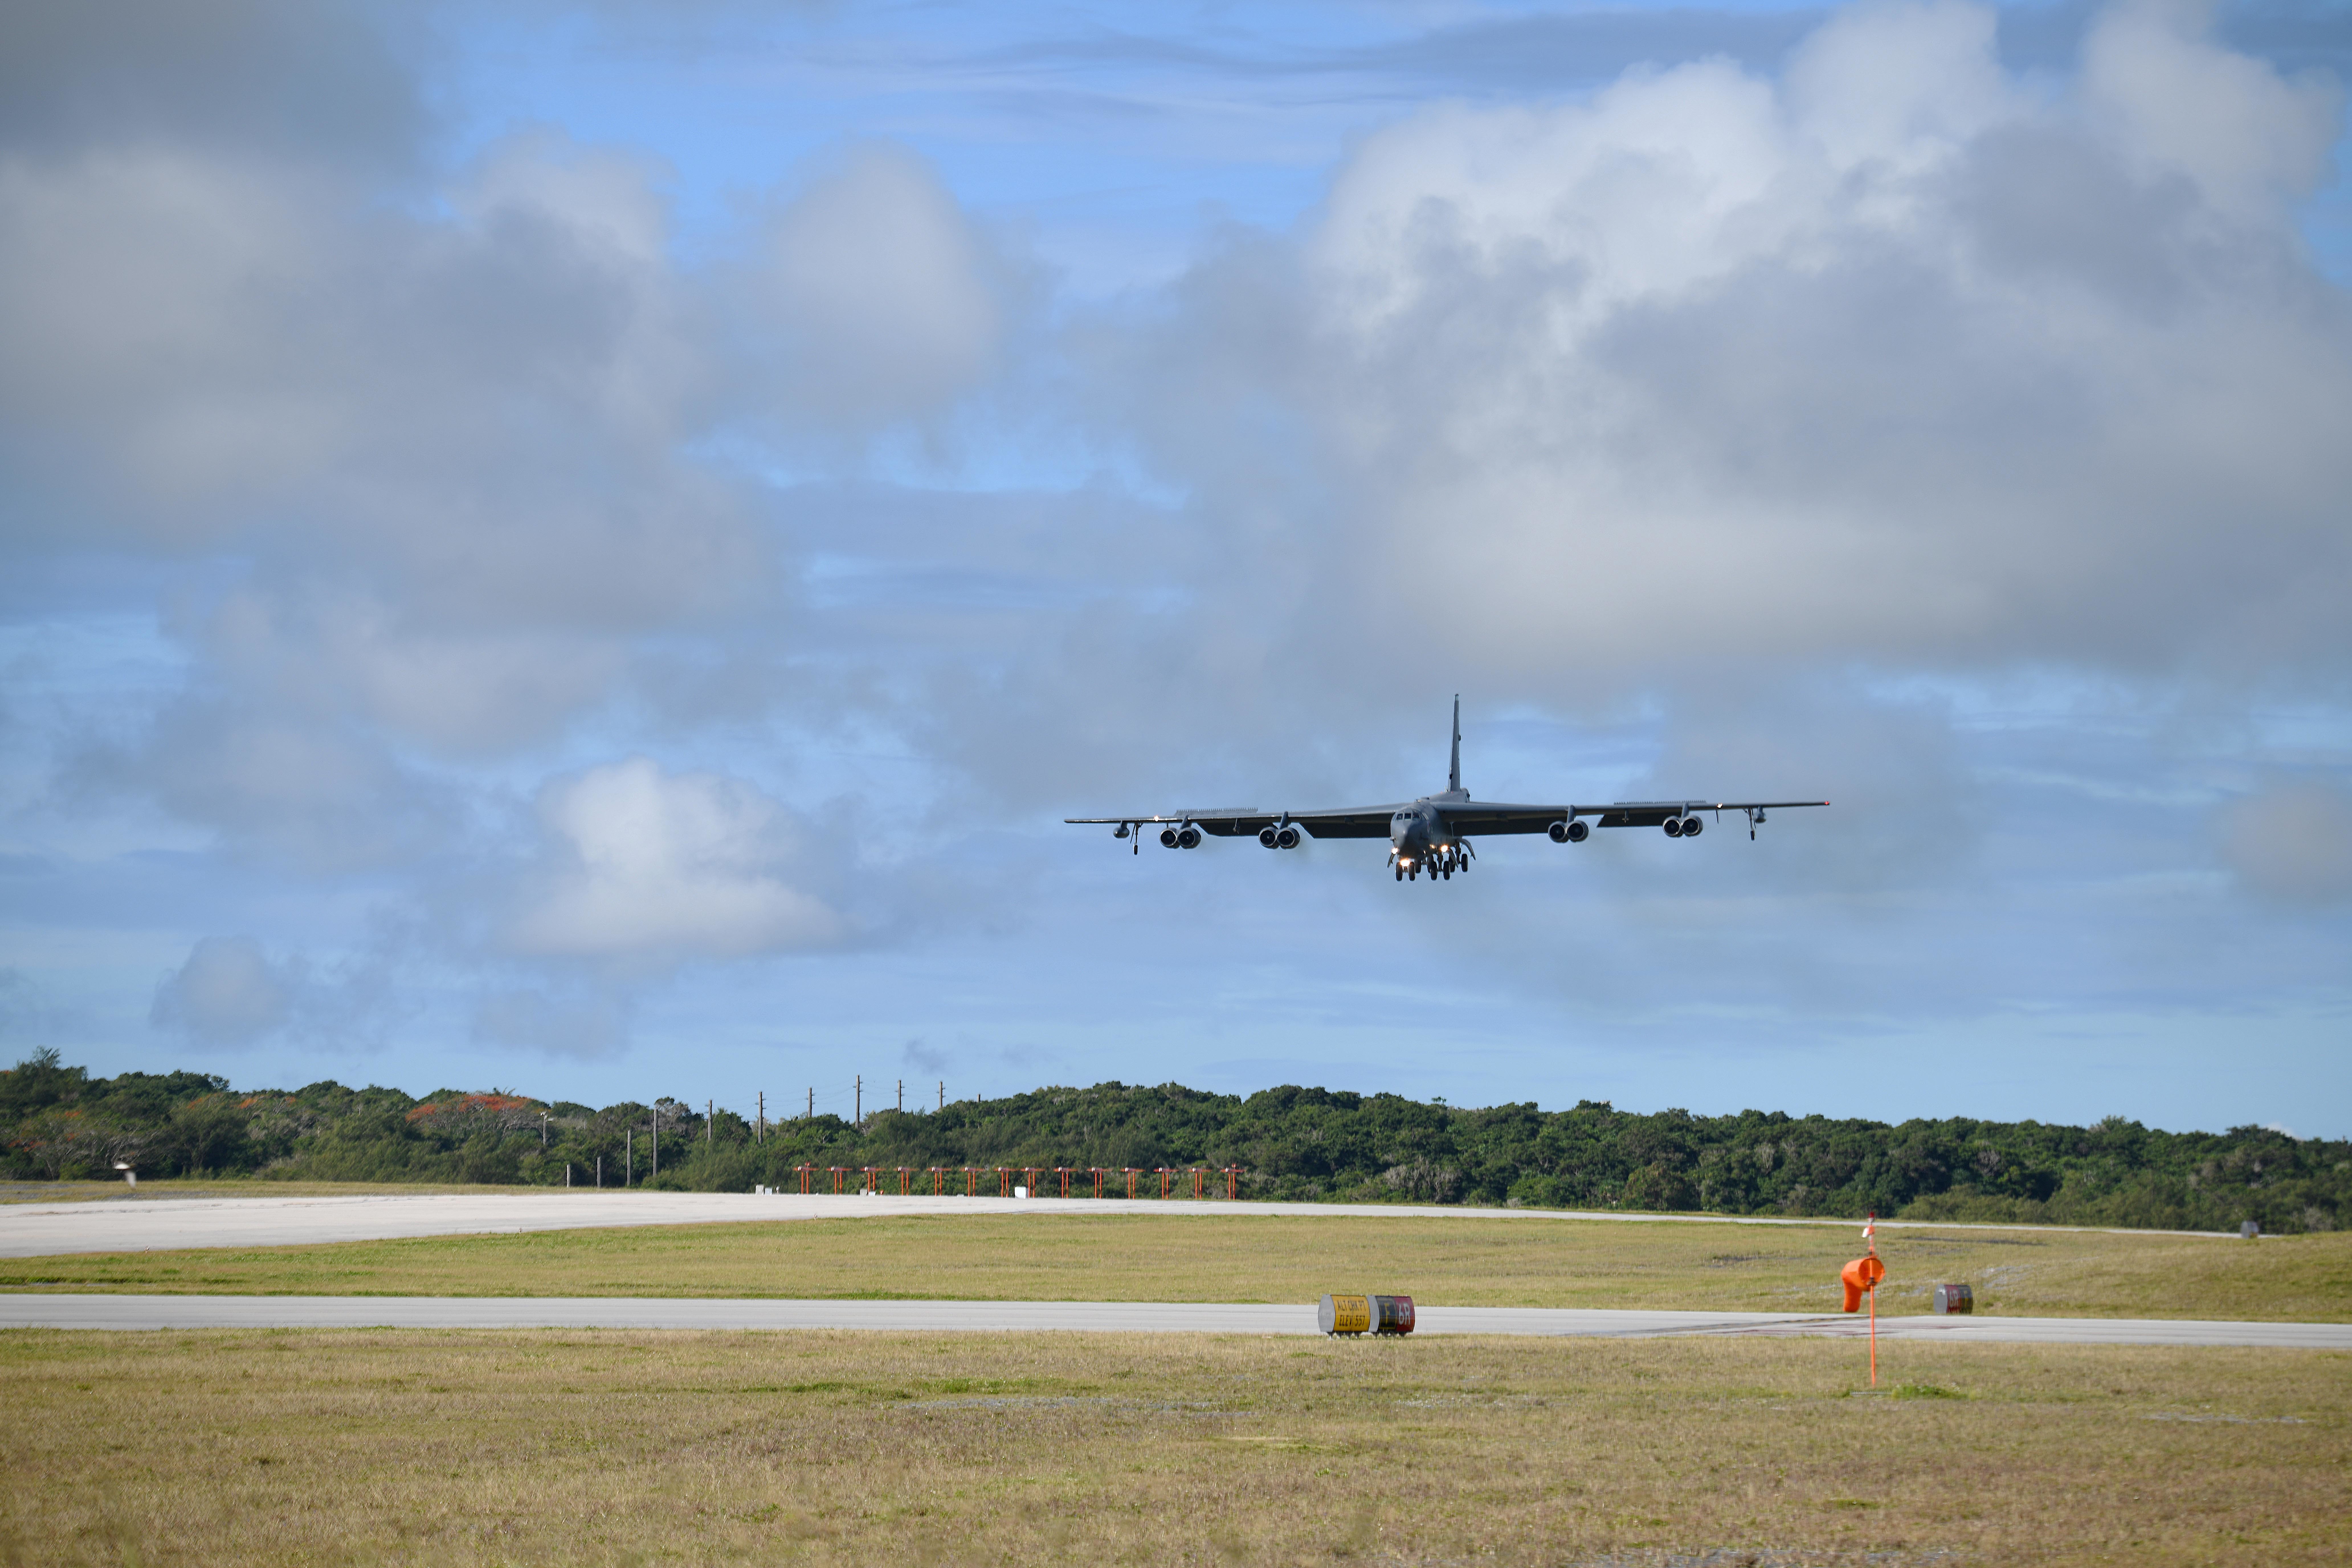 A B-52H assigned to Barksdale Air Force Base, Louisiana, arrives at Andersen Air Force Base, Guam, in support of a previous Bomber Task Force deployment, in January 2020. <em>U.S. Air Force photo by 1st Lt. Denise C. Guiao-Corpuz</em><br>